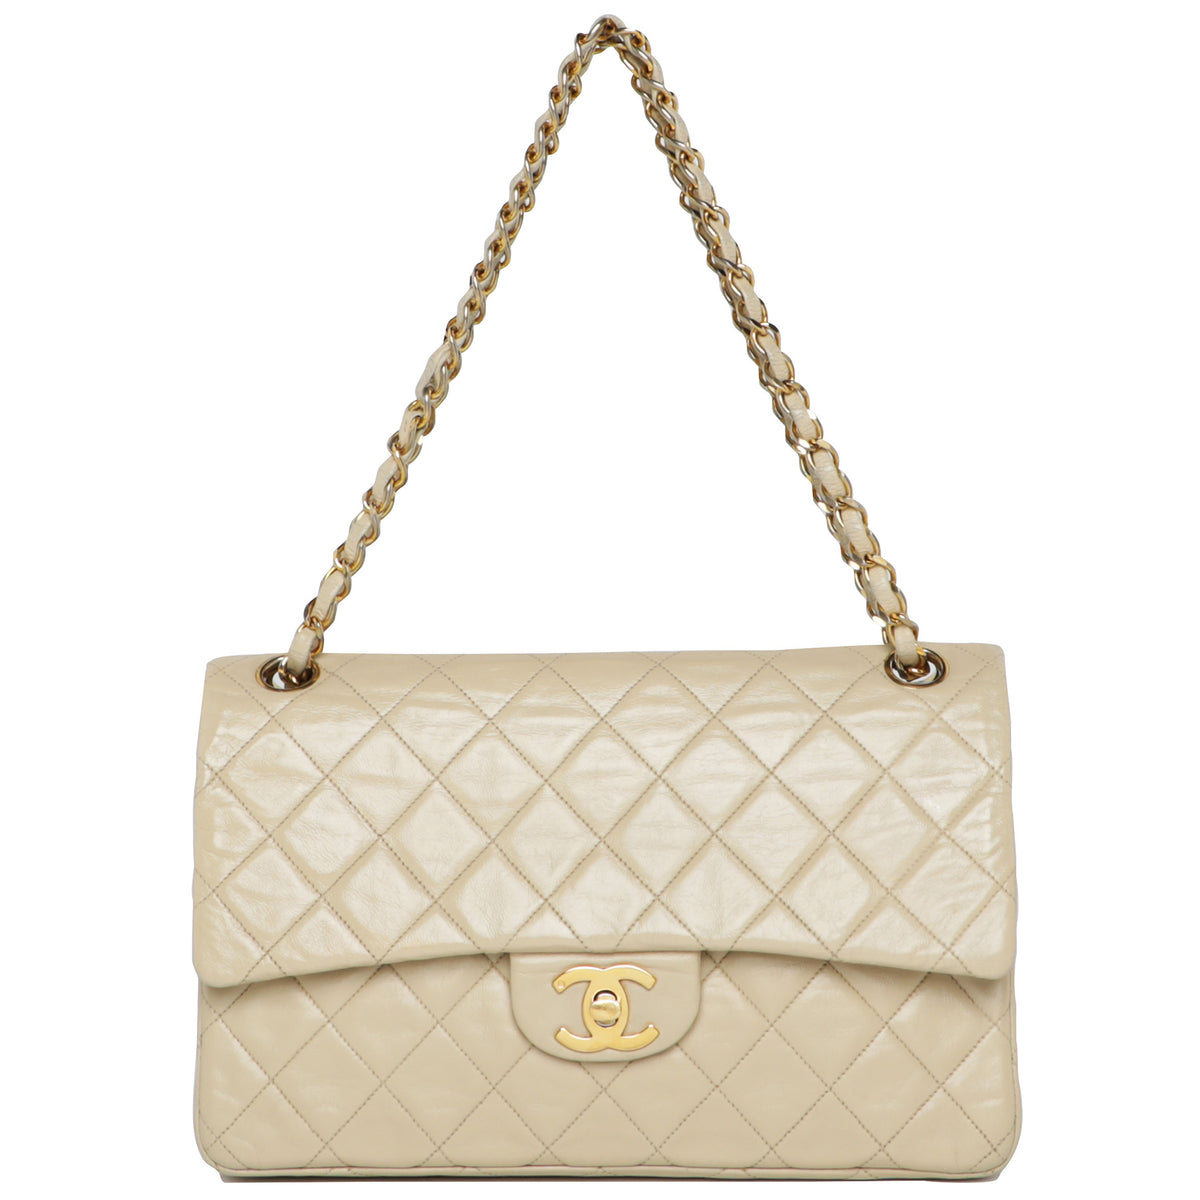 Chanel Vintage Chanel 7.5 Flap Beige Quilted Lambskin Leather